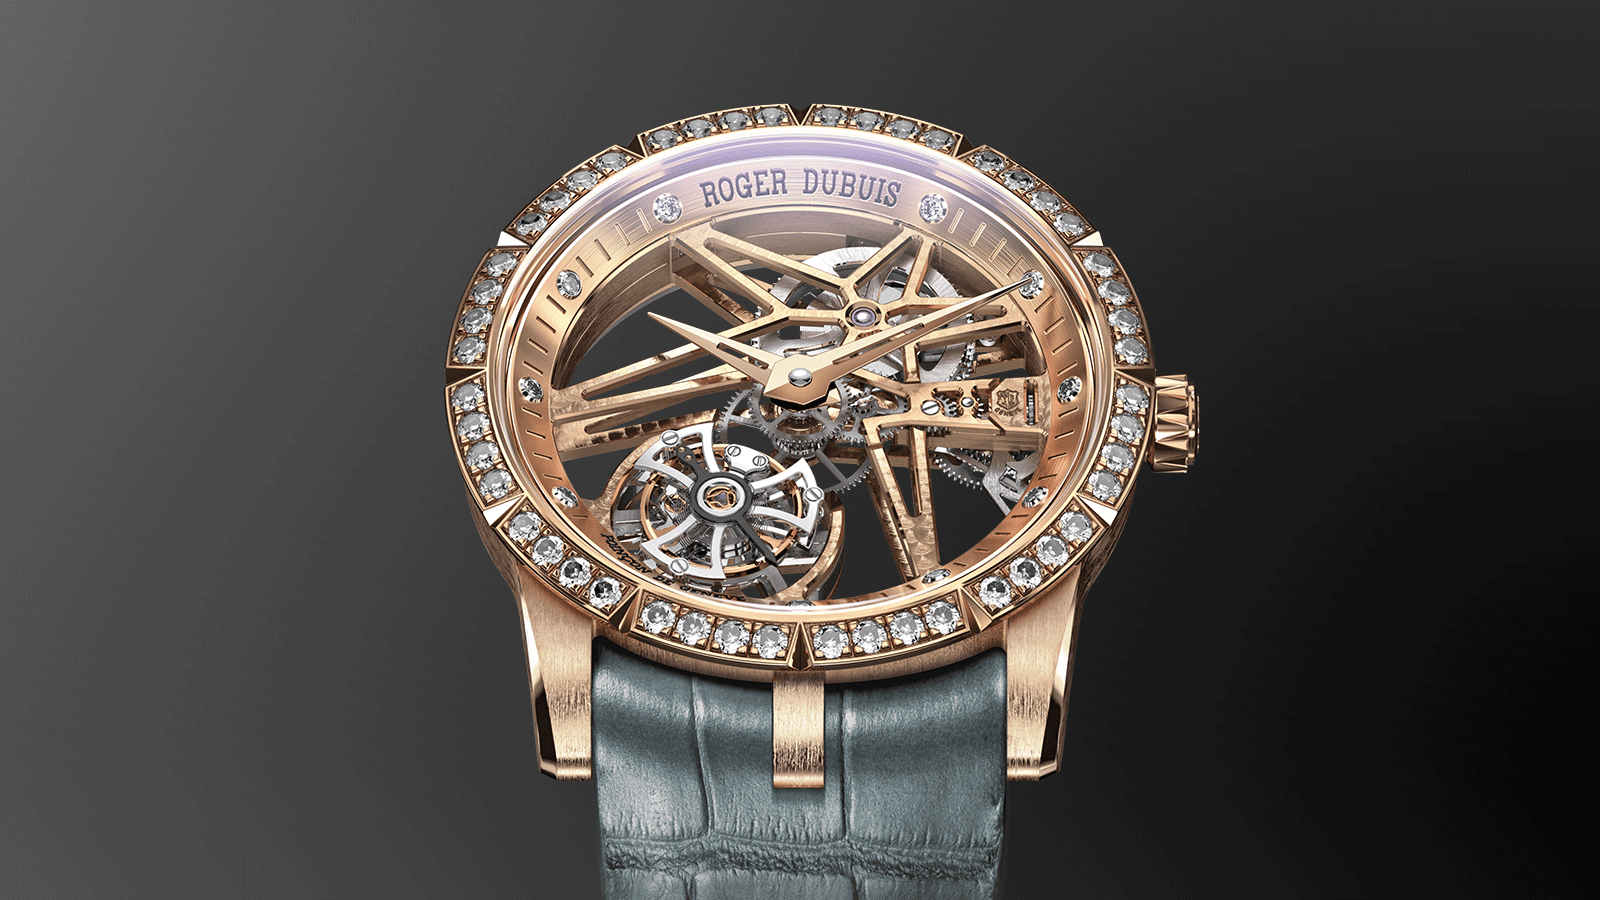 The skeleton calibres manufactured by Roger Dubuis in Geneva are the essence of the expressive singularity of the Excalibur collection.